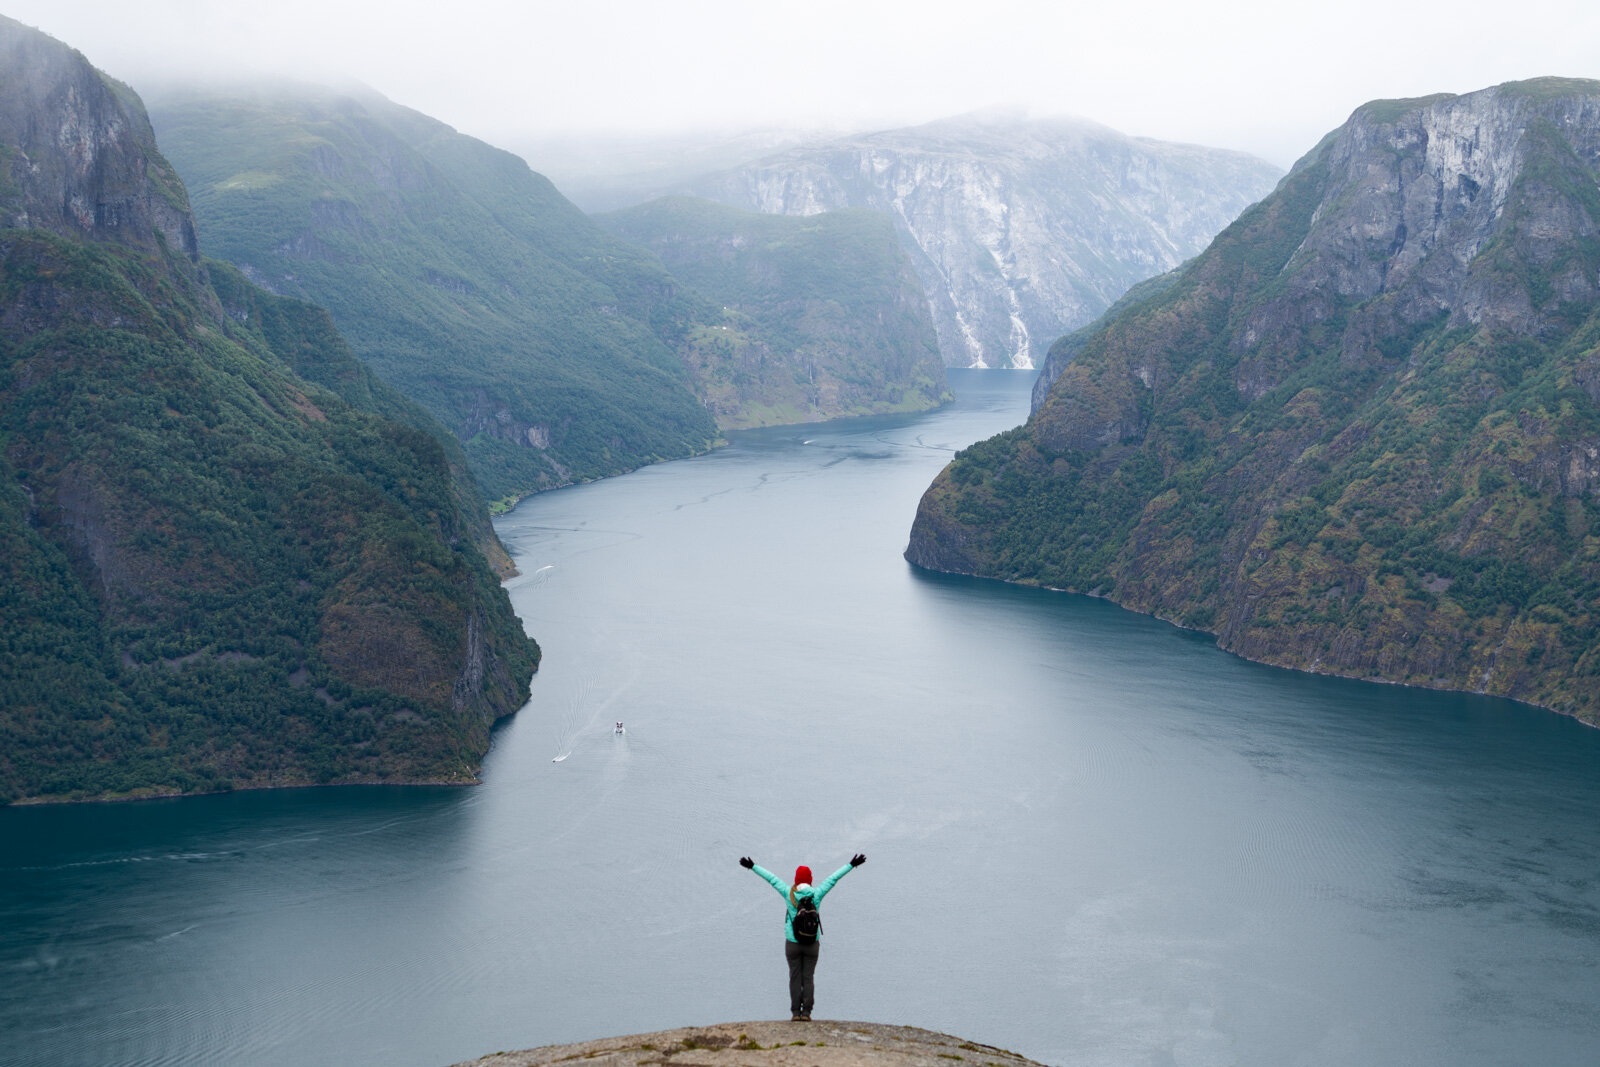 Four Days in Norway's Spectacular Western Fjords